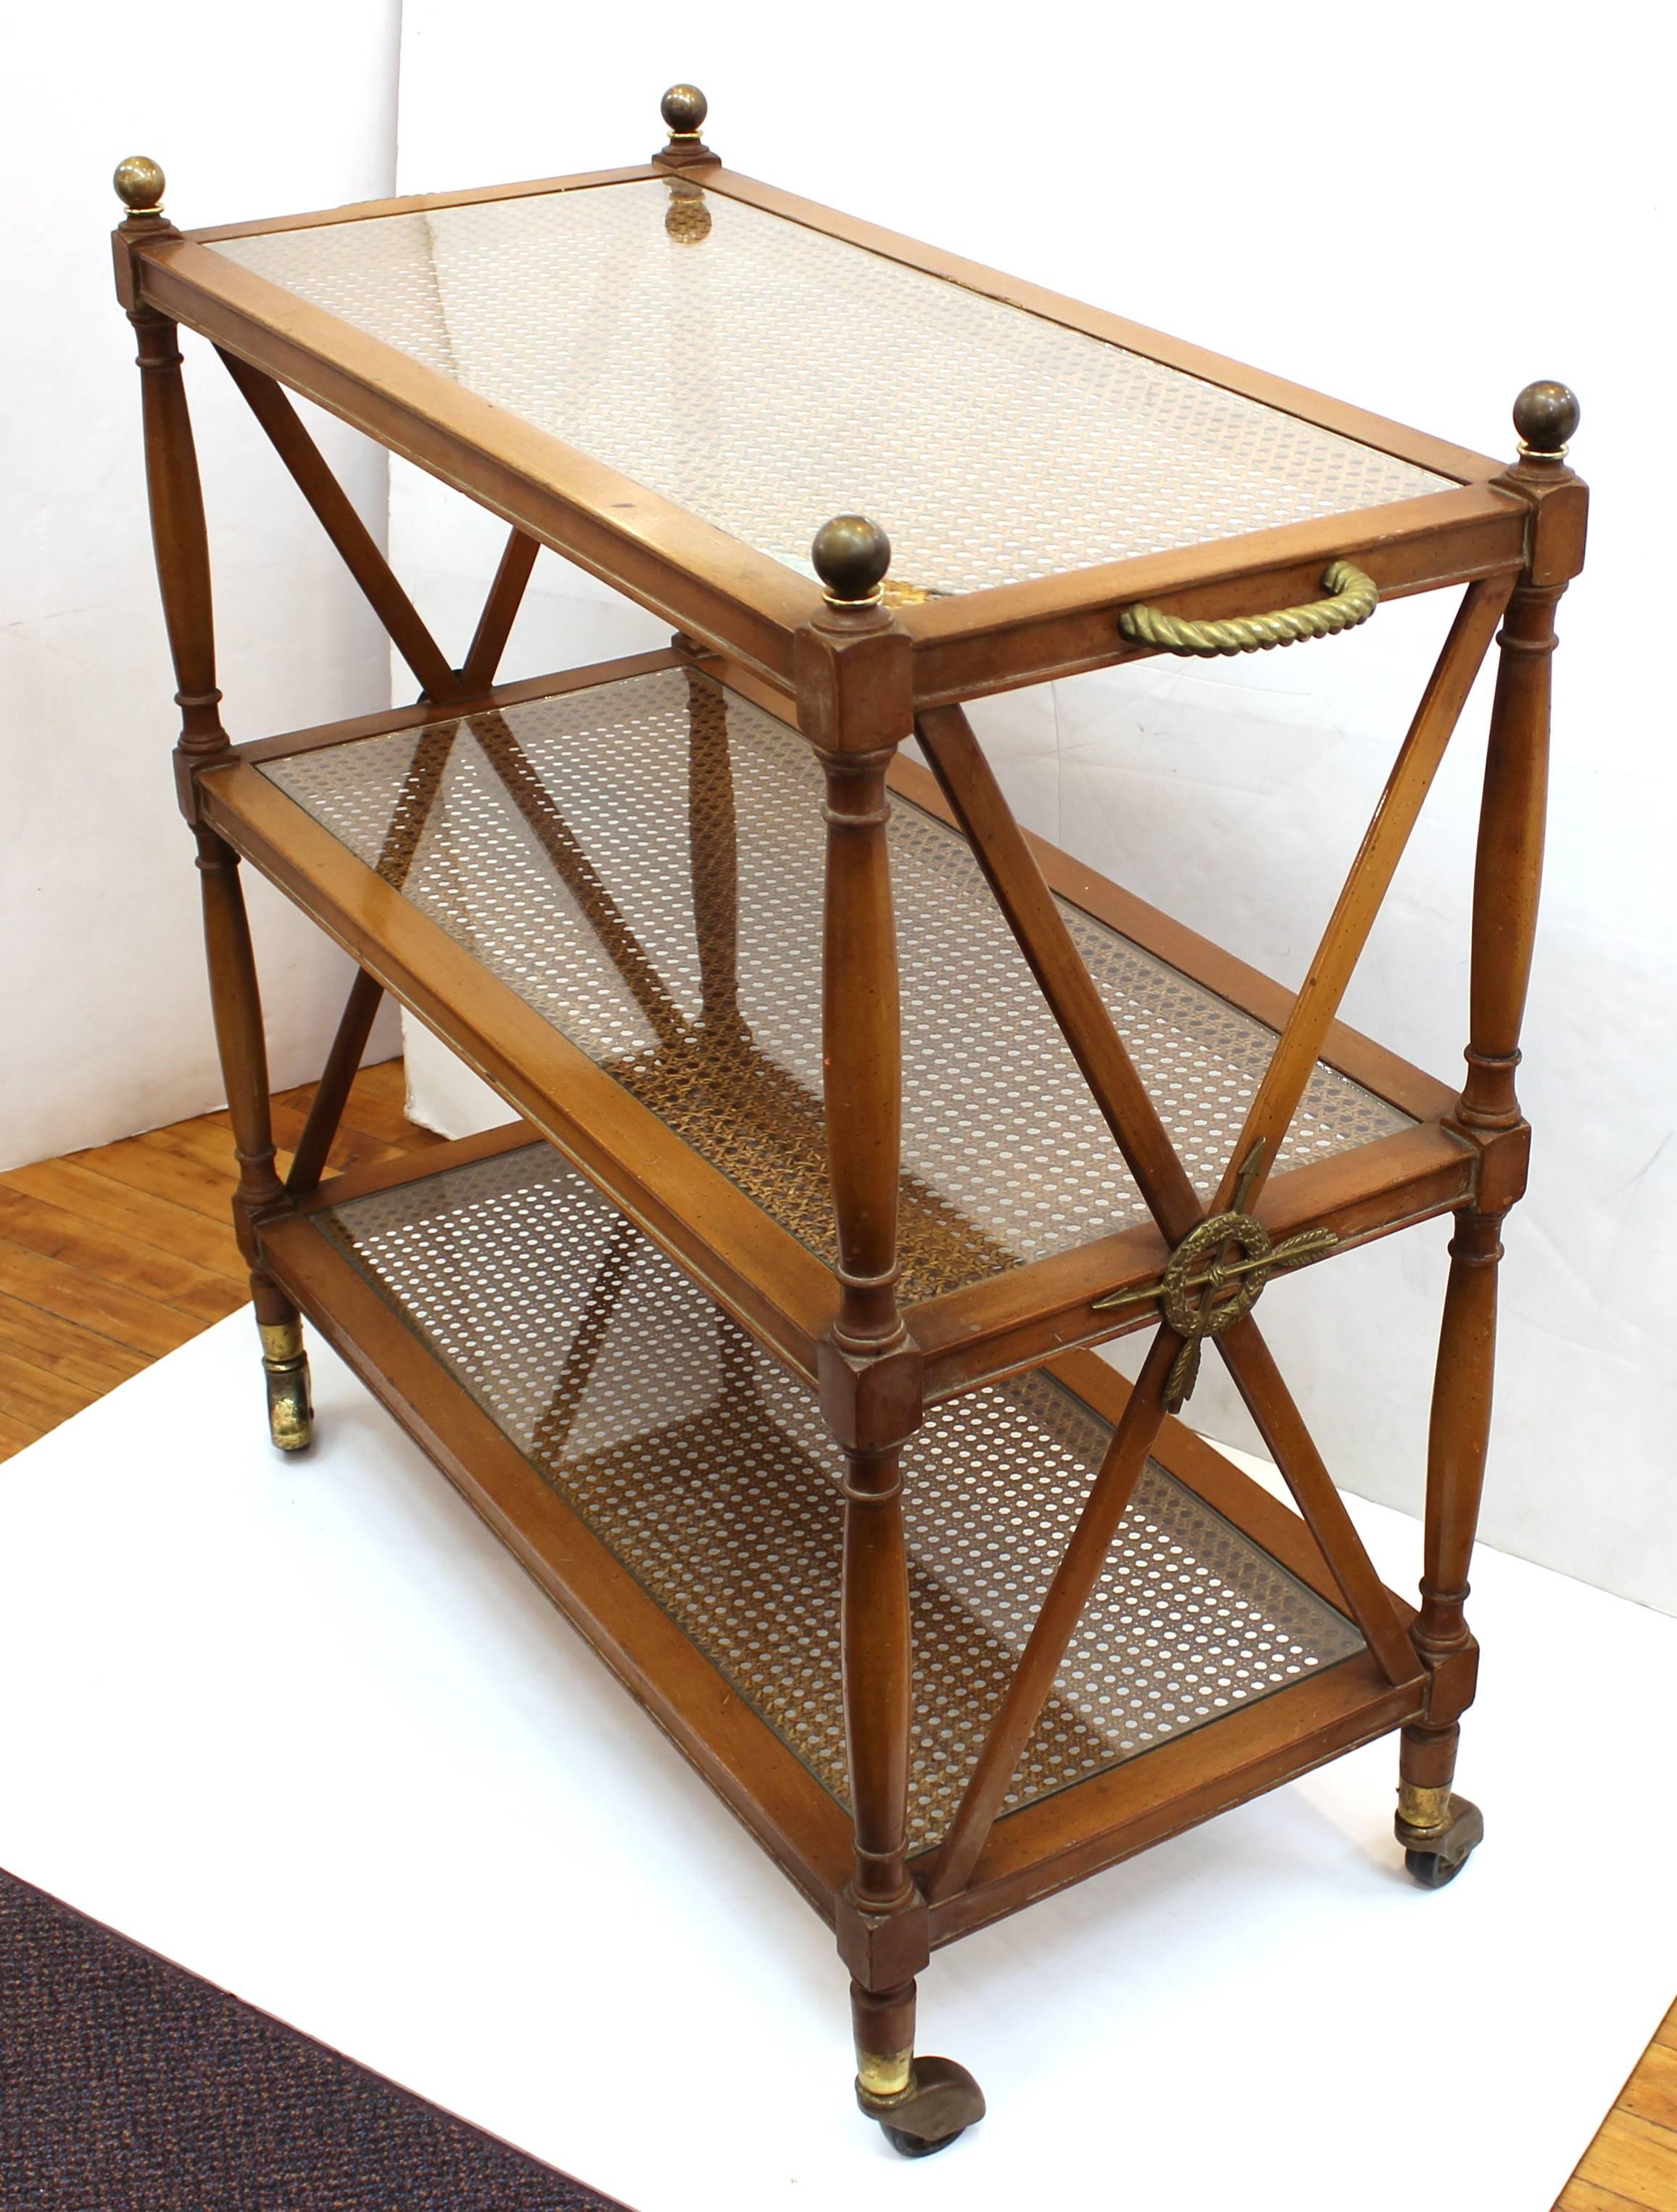 Bar cart produced during the 1940s in the neoclassical style. The cart features three tiers in cane, wood and glass. The piece also includes castors and brass details such as twisted rope handles and wreath medallions with arrows. Wear appropriate